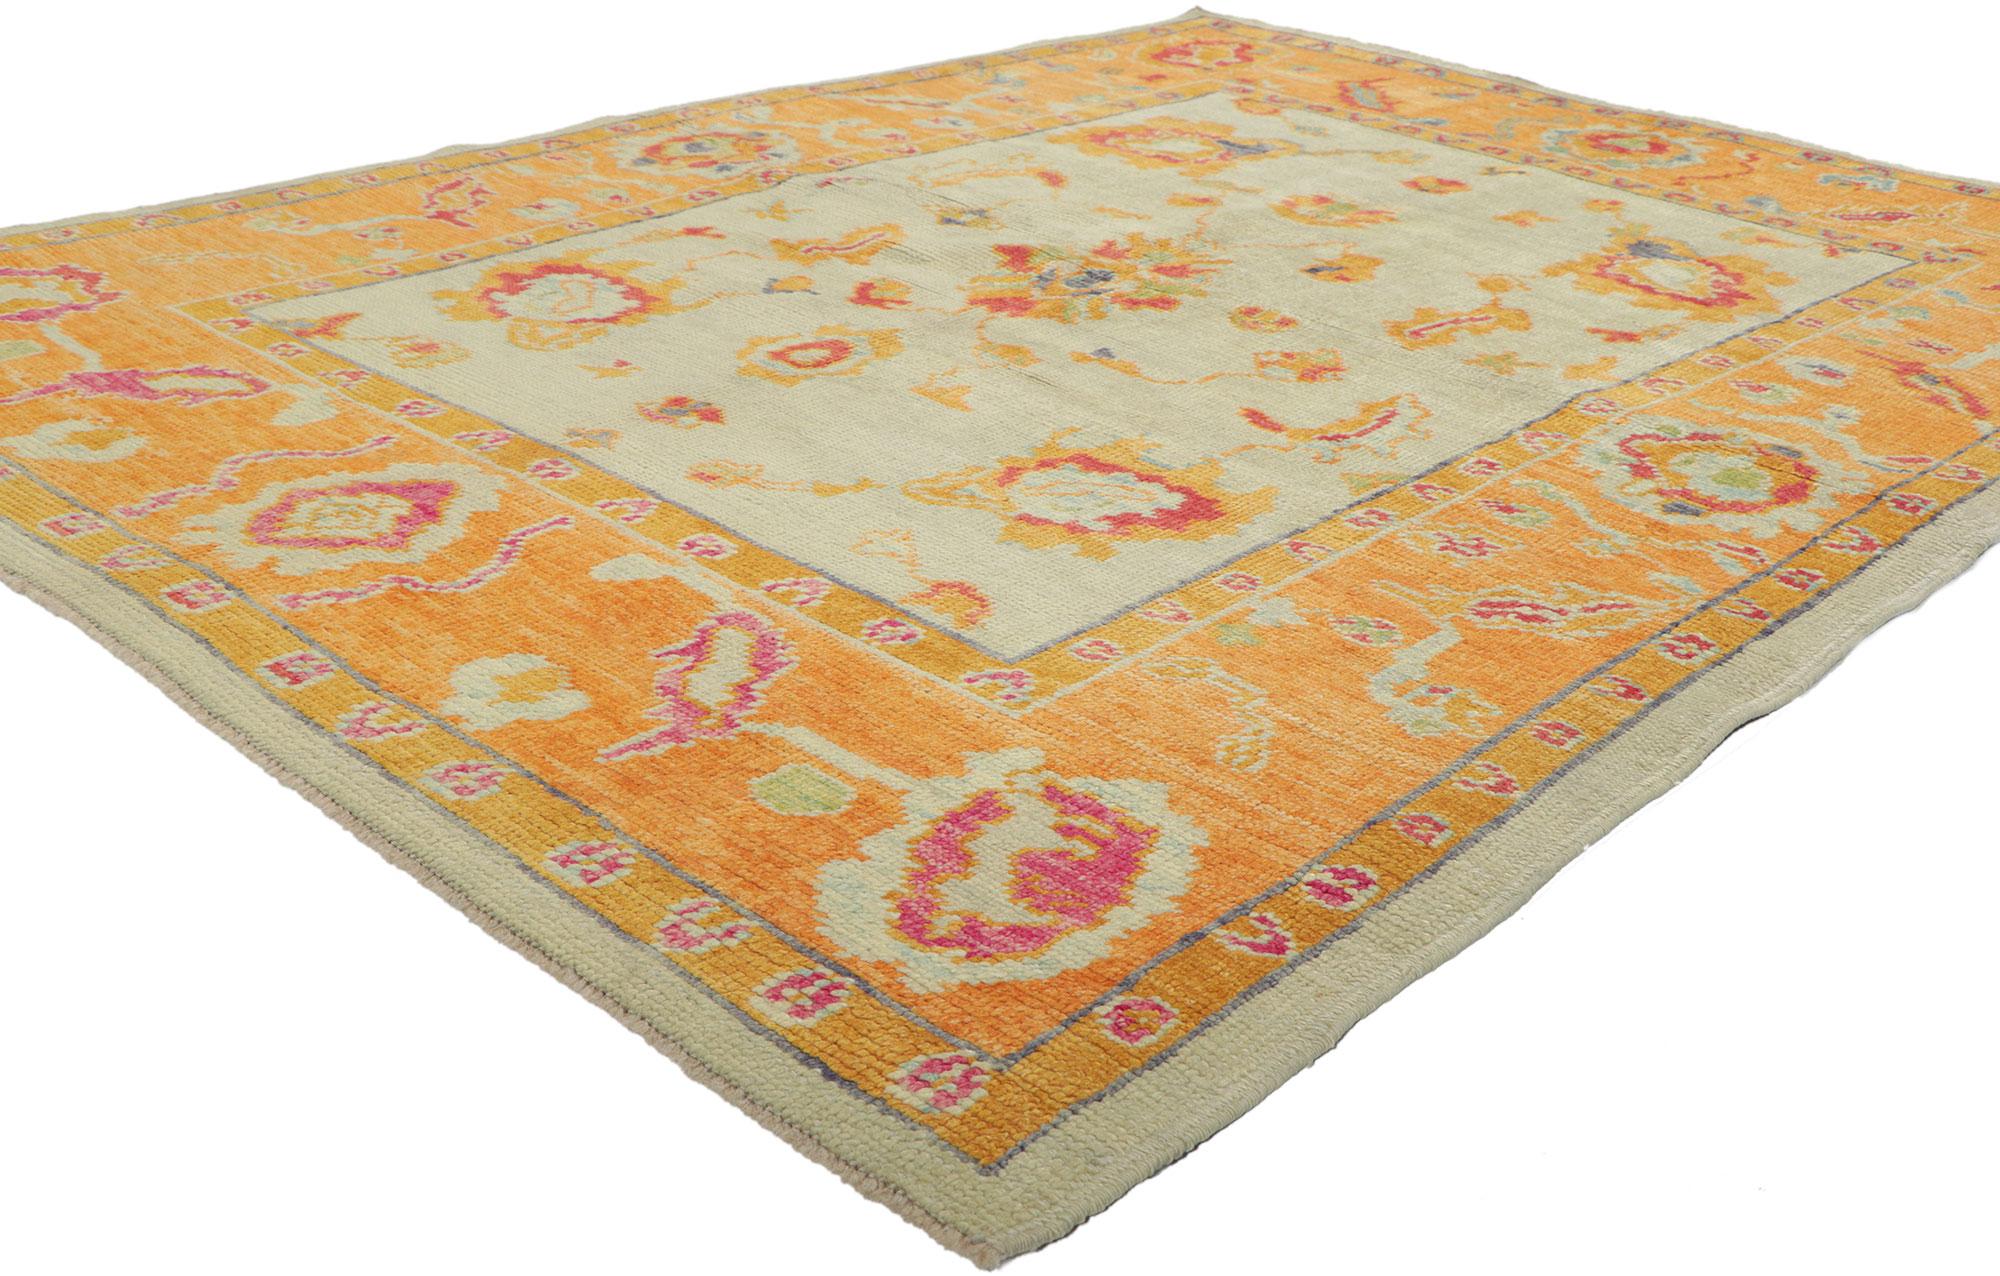 52367 New Colorful Turkish Oushak Rug, 05'00 x 06'09. 
This hand-knotted wool contemporary Turkish Oushak rug features a vibrant all-over floral pattern spread across an abrashed ivory field. Reminiscent of the classic four-and-one medallion design